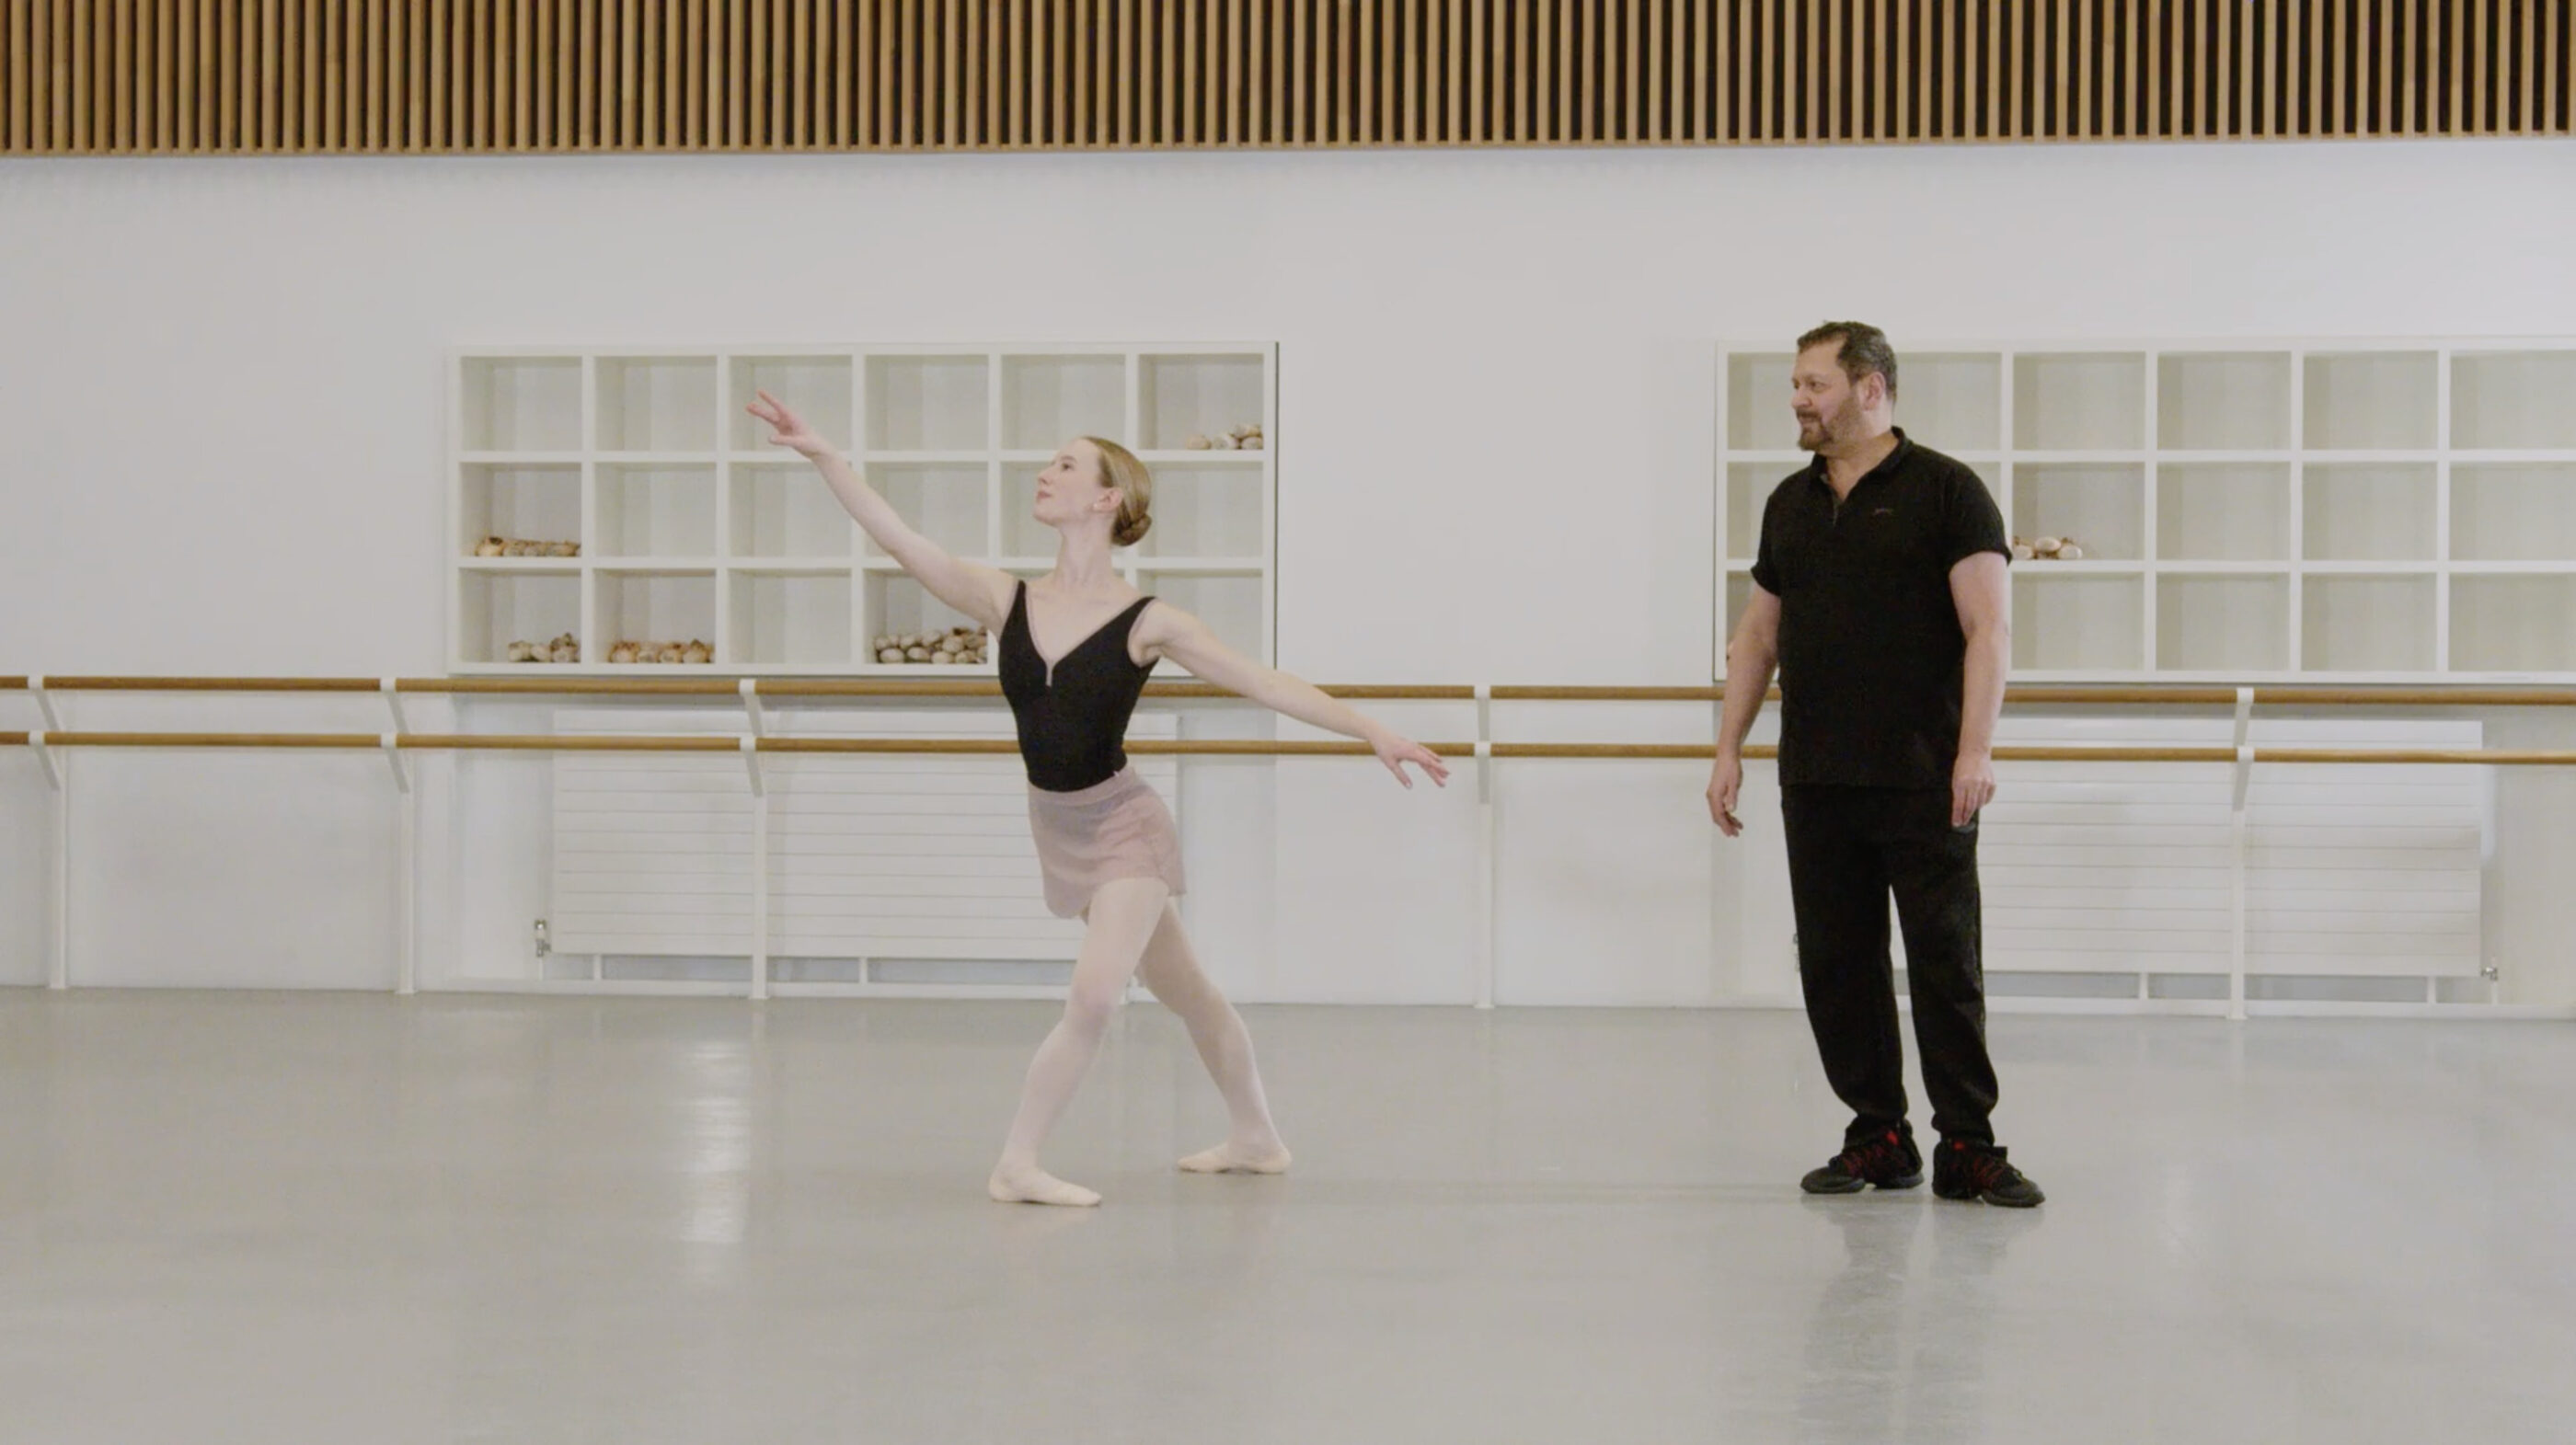 A ballet teacher and a demonstrator are in a studio. The demonstrator has just finished a pirouette. The demonstrator is wearing a black leotard and pink skirt. The teacher is wearing black clothing.